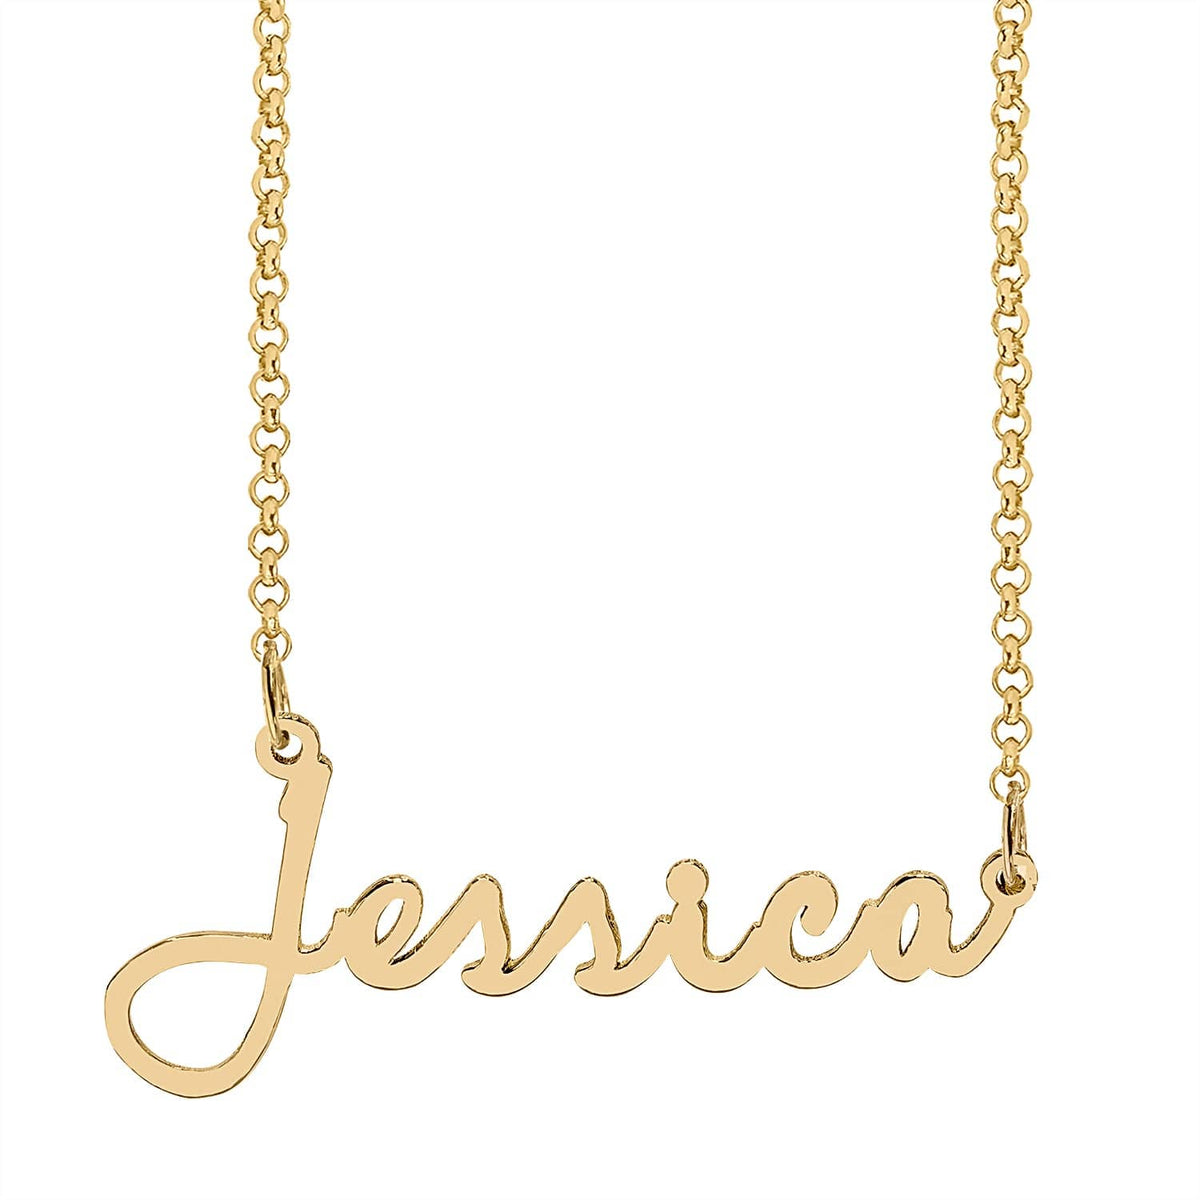 1 Name Pendant / 14K Gold Over Sterling Silver / Rollo Chain Script Name Necklace